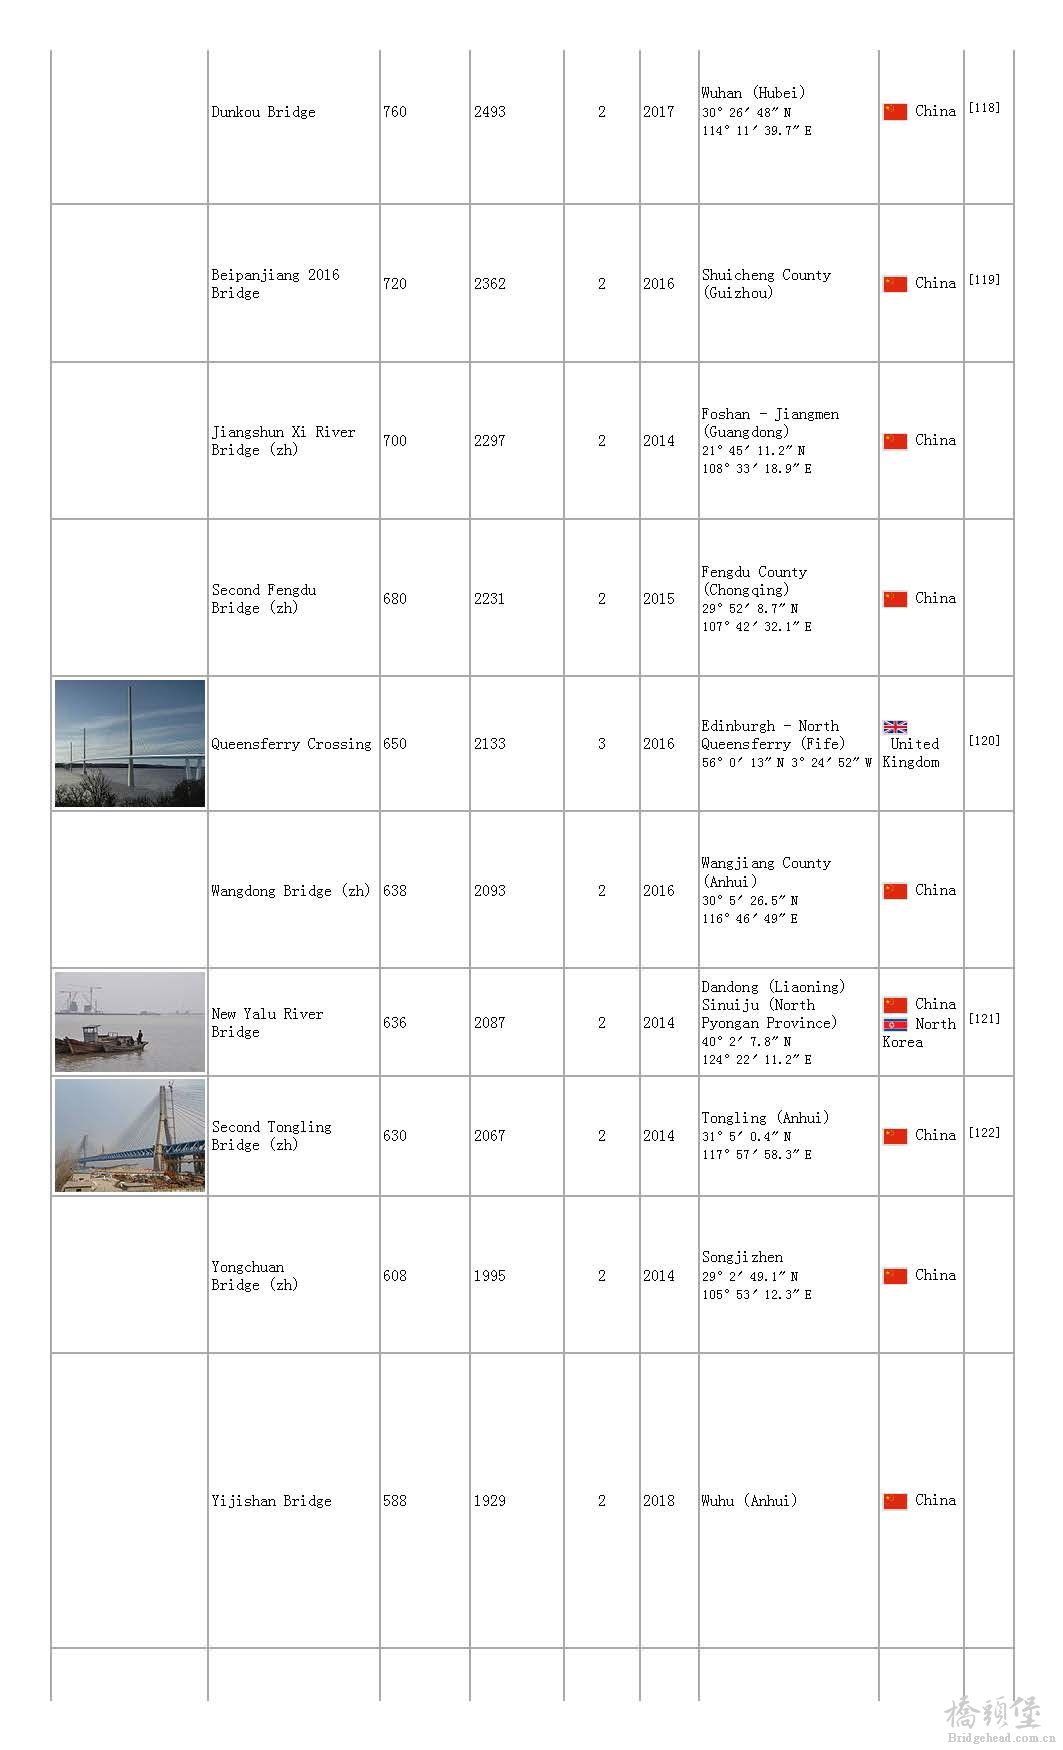 List of longest cable-stayed bridge spans - Wikipedia, the free encyclopedia_页面_13.jpg